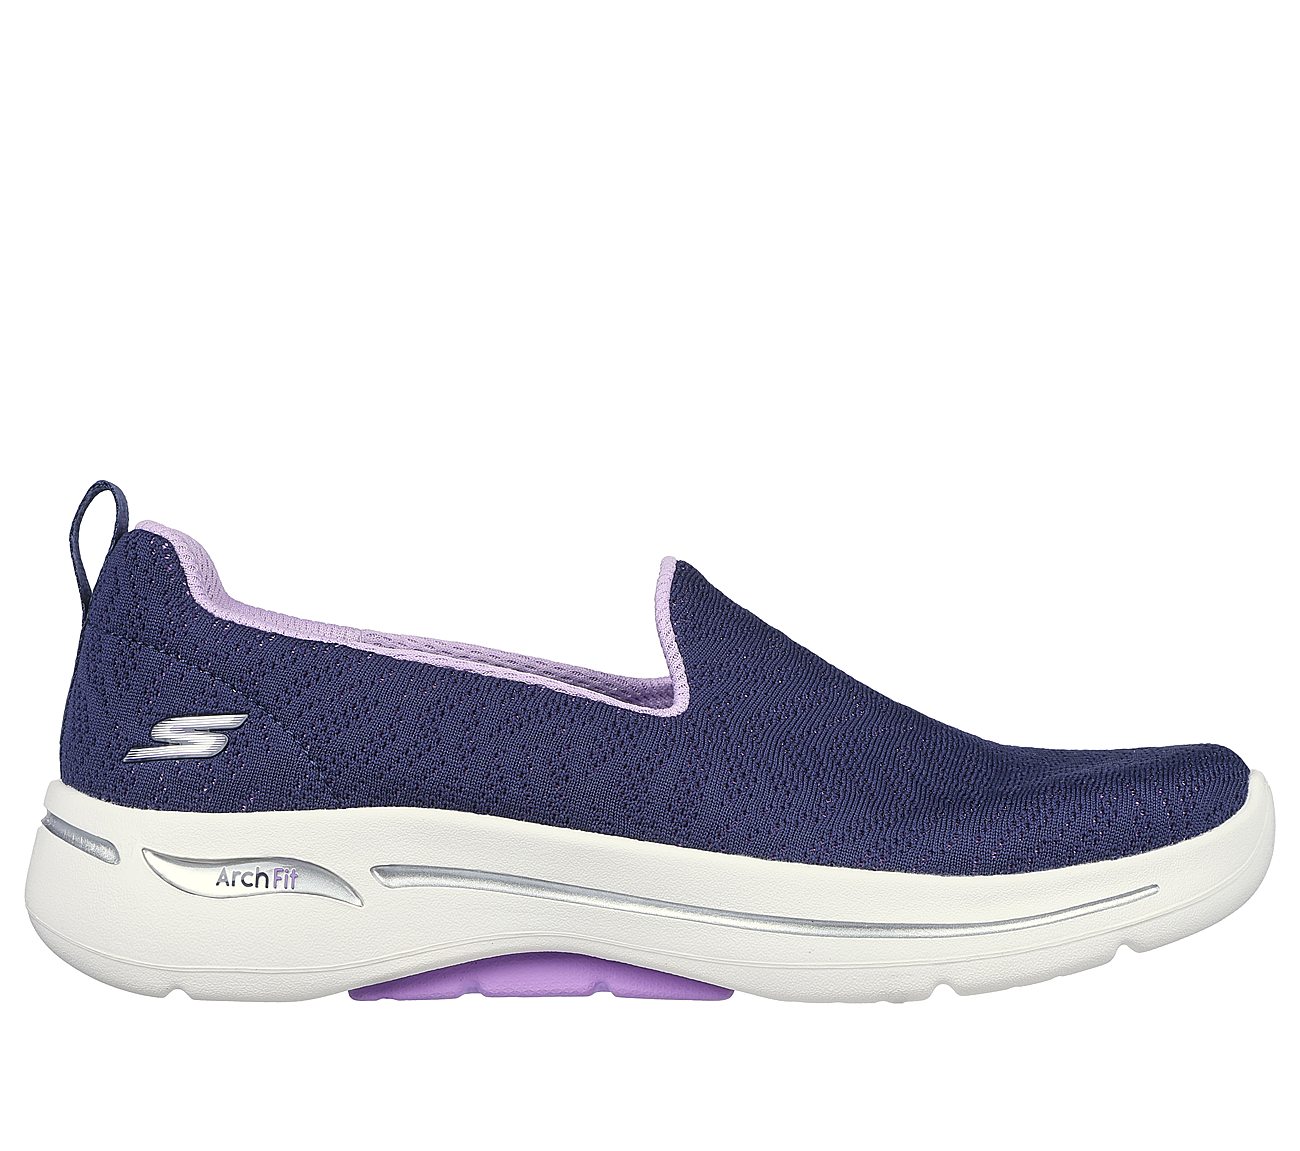 Skechers Navy Go Walk-Arch-Fit-O Slip On Shoes For Women - Style ID ...